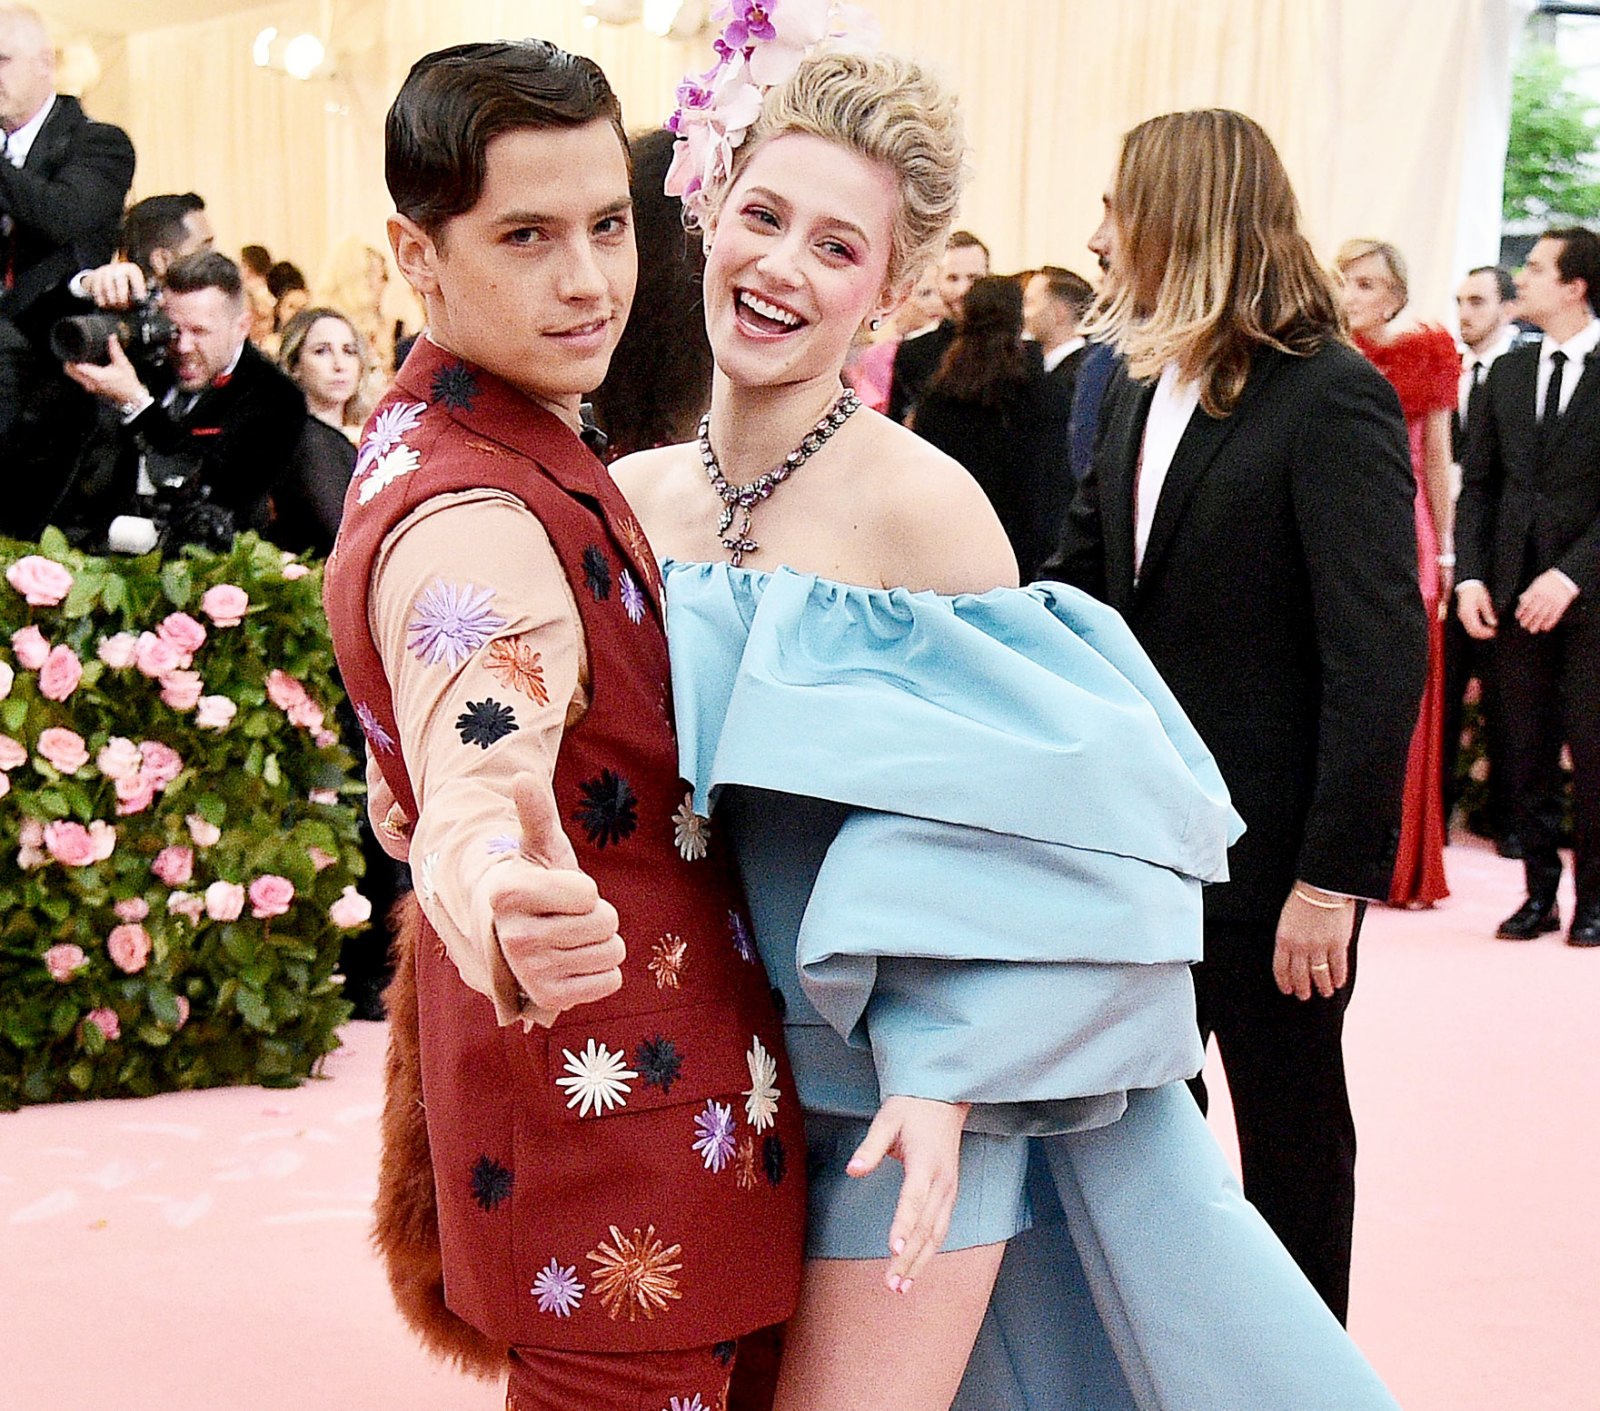 Cole Sprouse and Lily Reinhart Attend The 2019 Met Gala The Way They Were